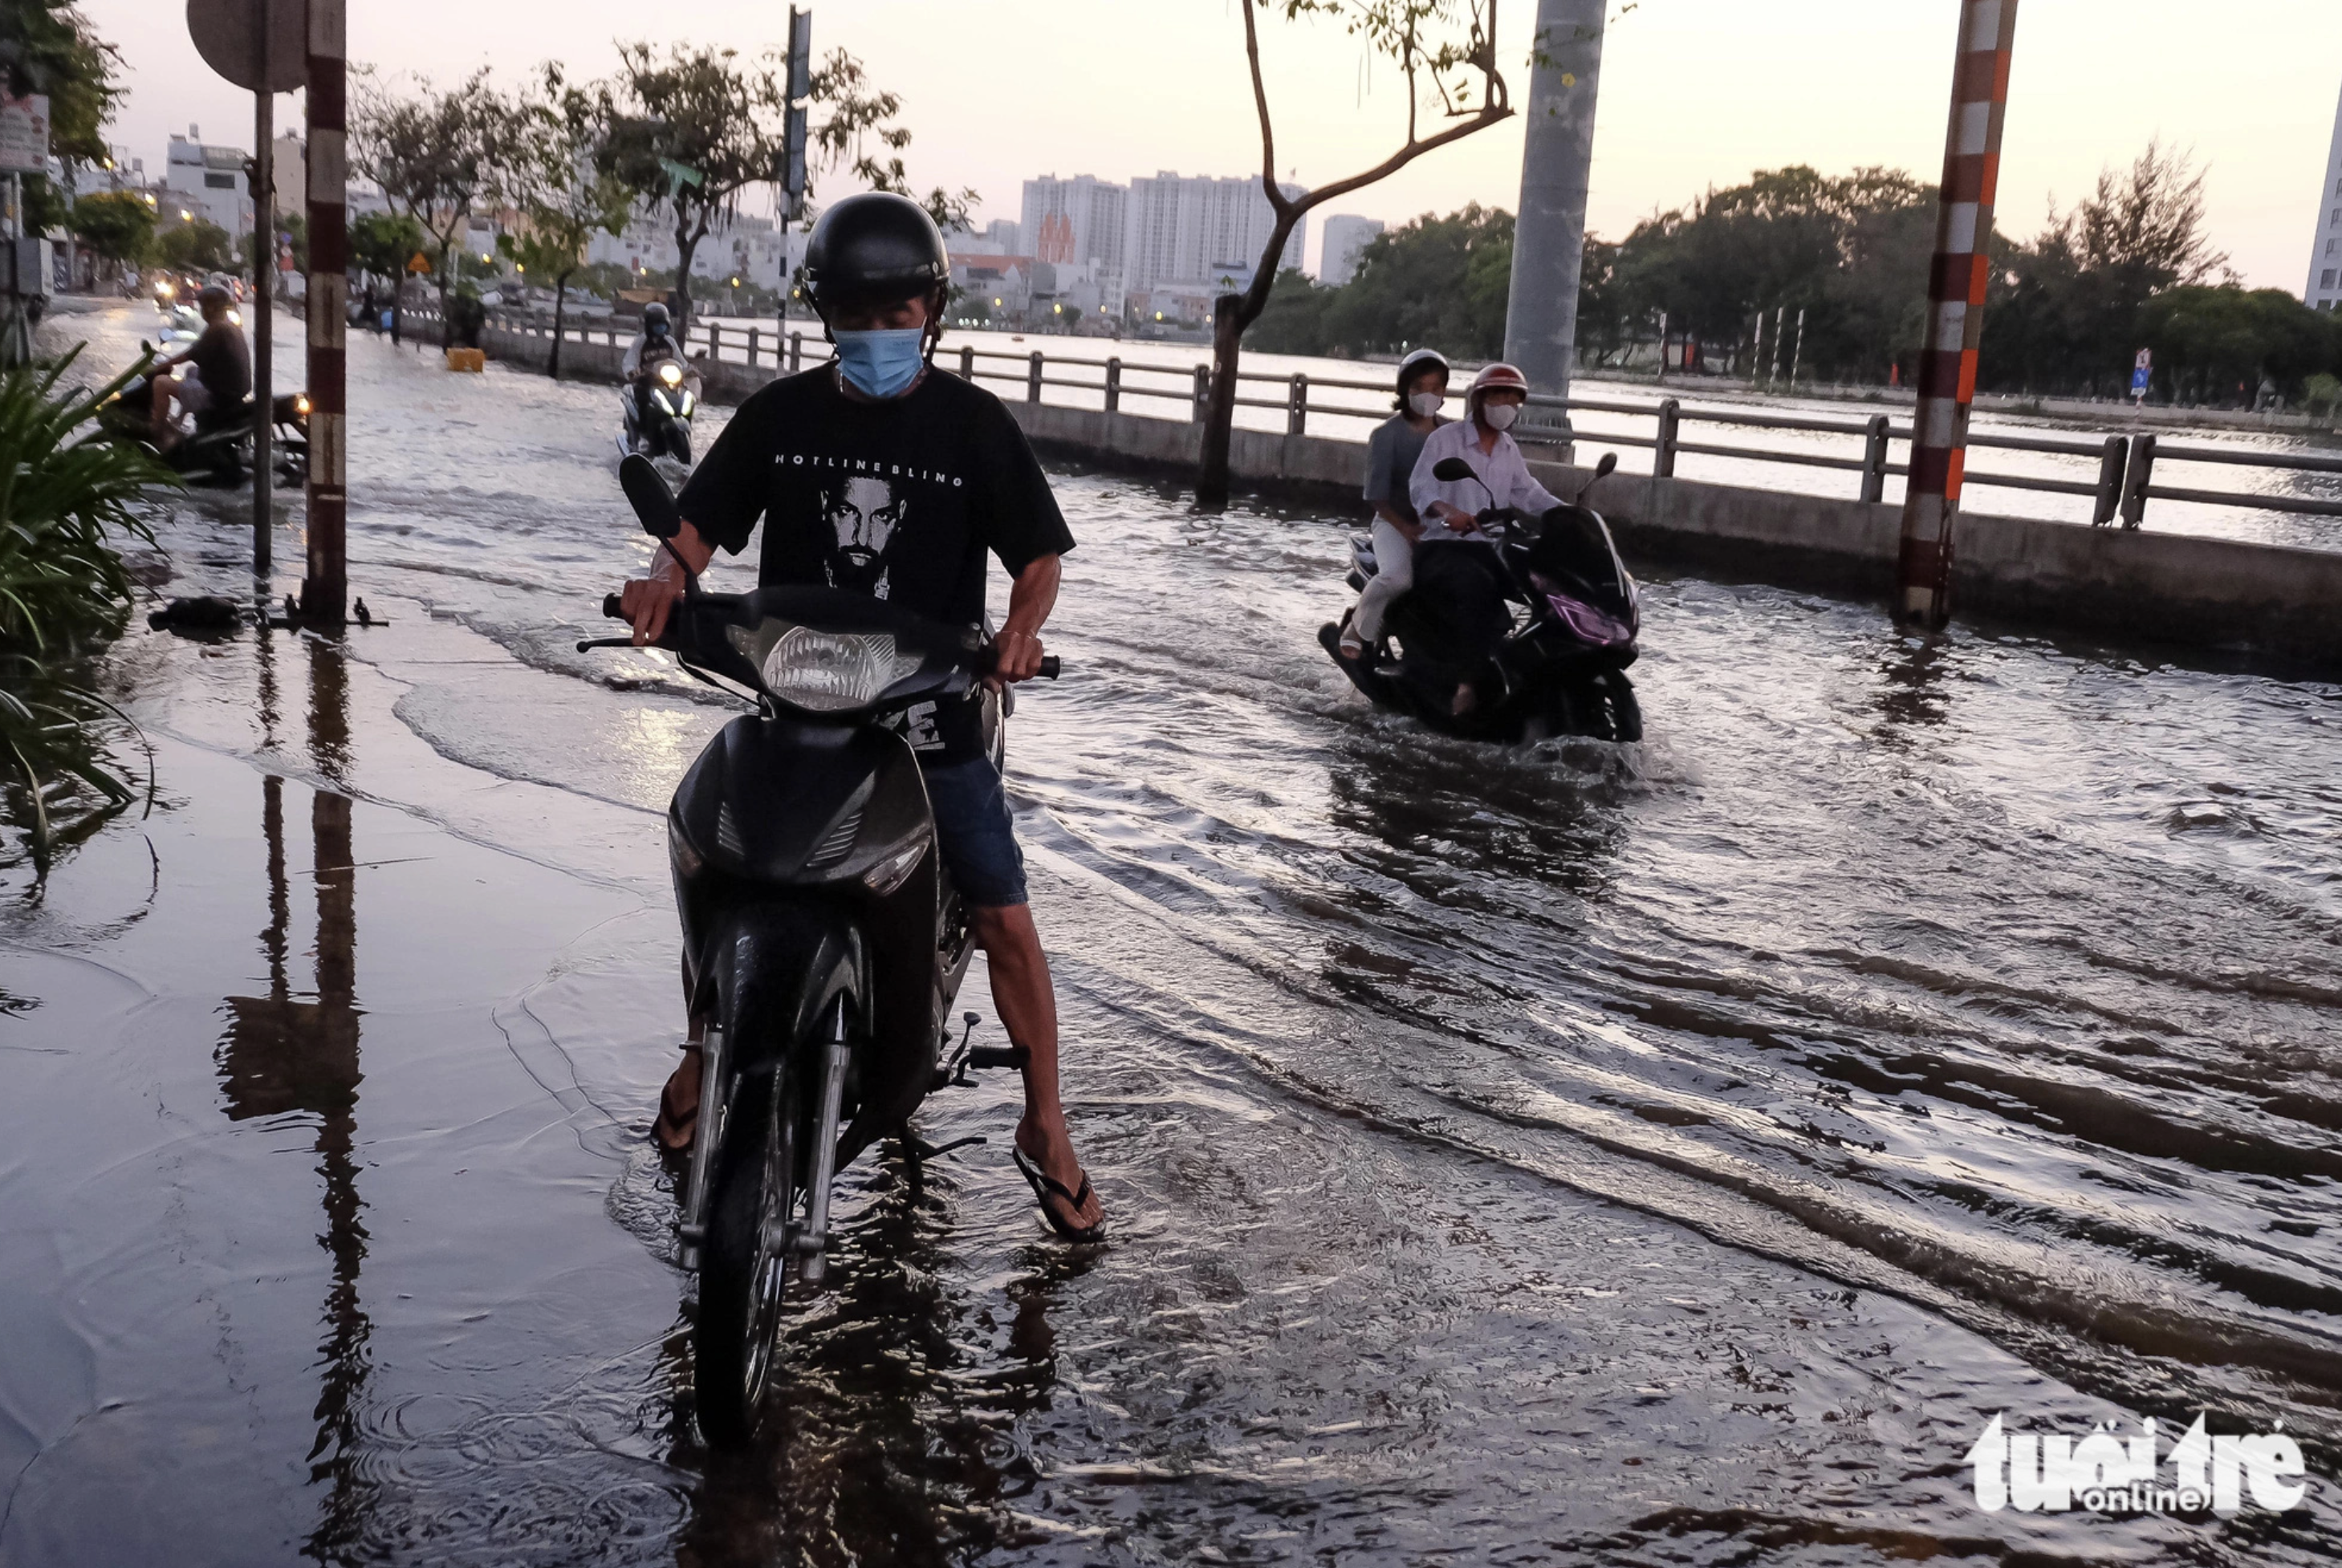 Nam’s motorcycle broke down while he was traveling on a flooded street in District 7, Ho Chi Minh City, caused by high tide. Photo: Tuoi Tre